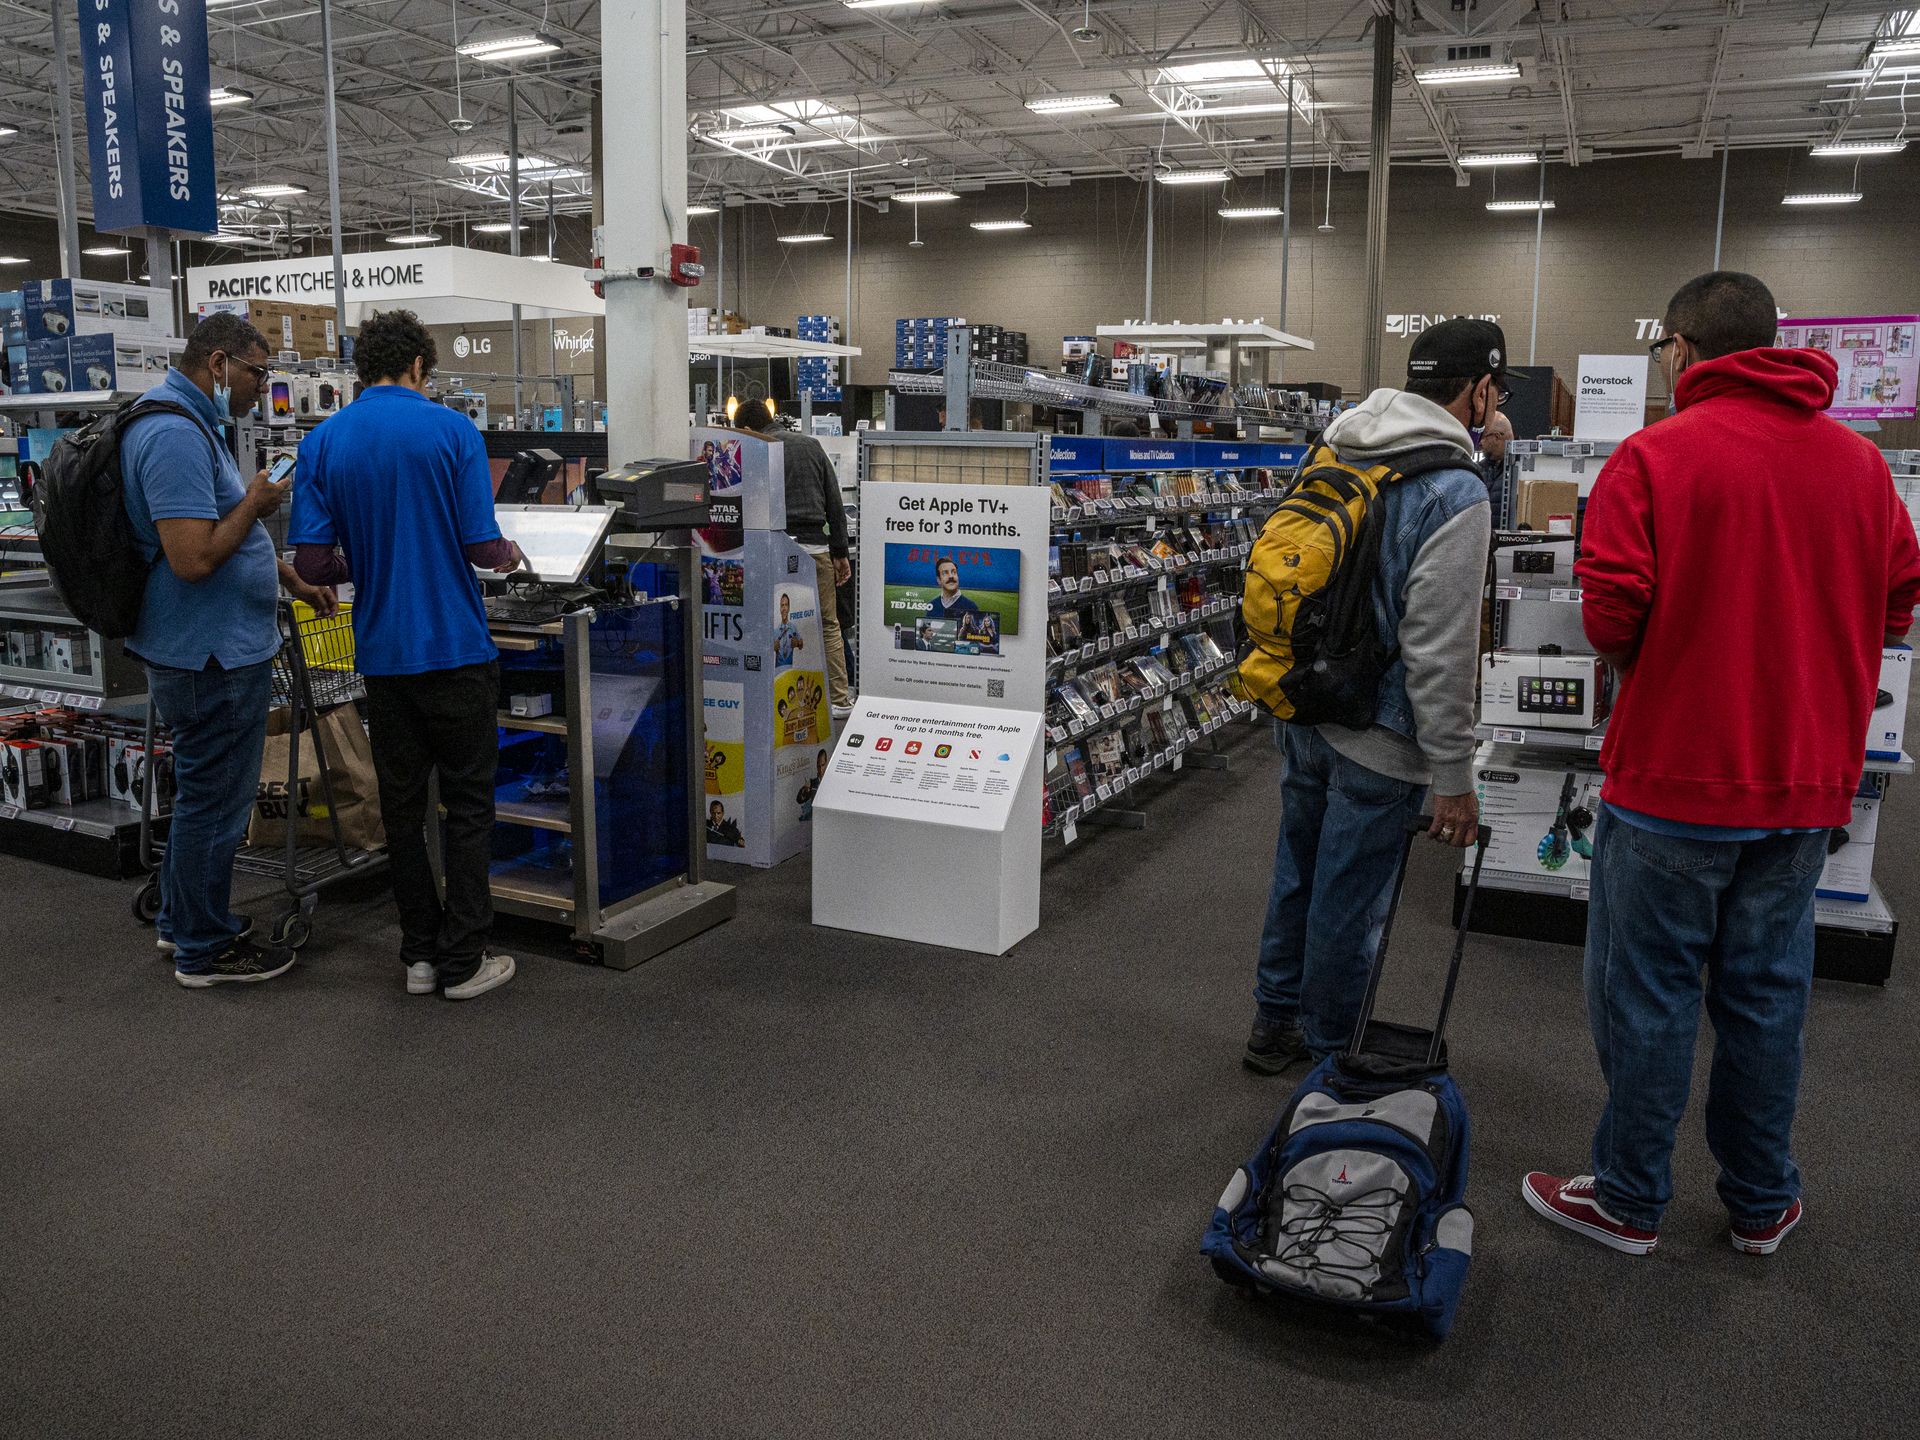 Best Buy's future plans include closing stores and shrinking